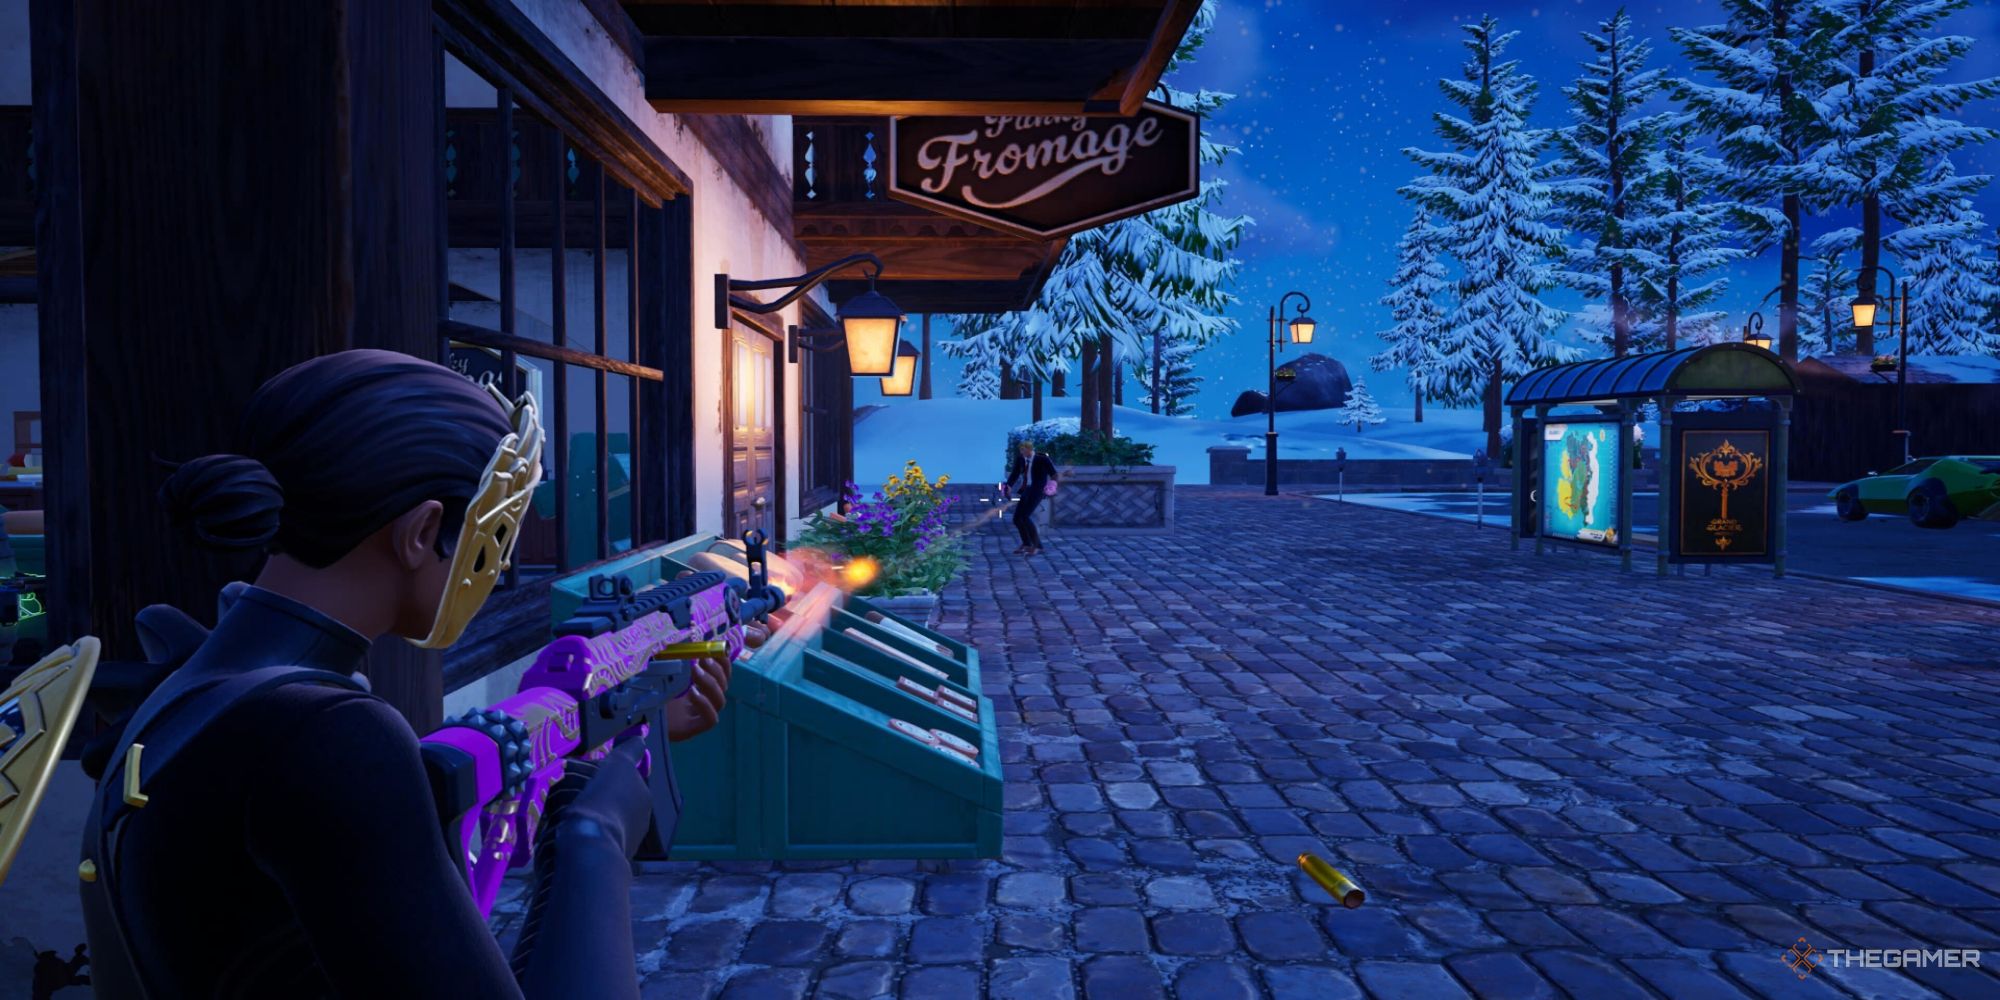 A screenshot from Fortnite's Battle Royale mode, showing the player character as Nisha aiming down the weapons sites and shooting at another player in front of a market